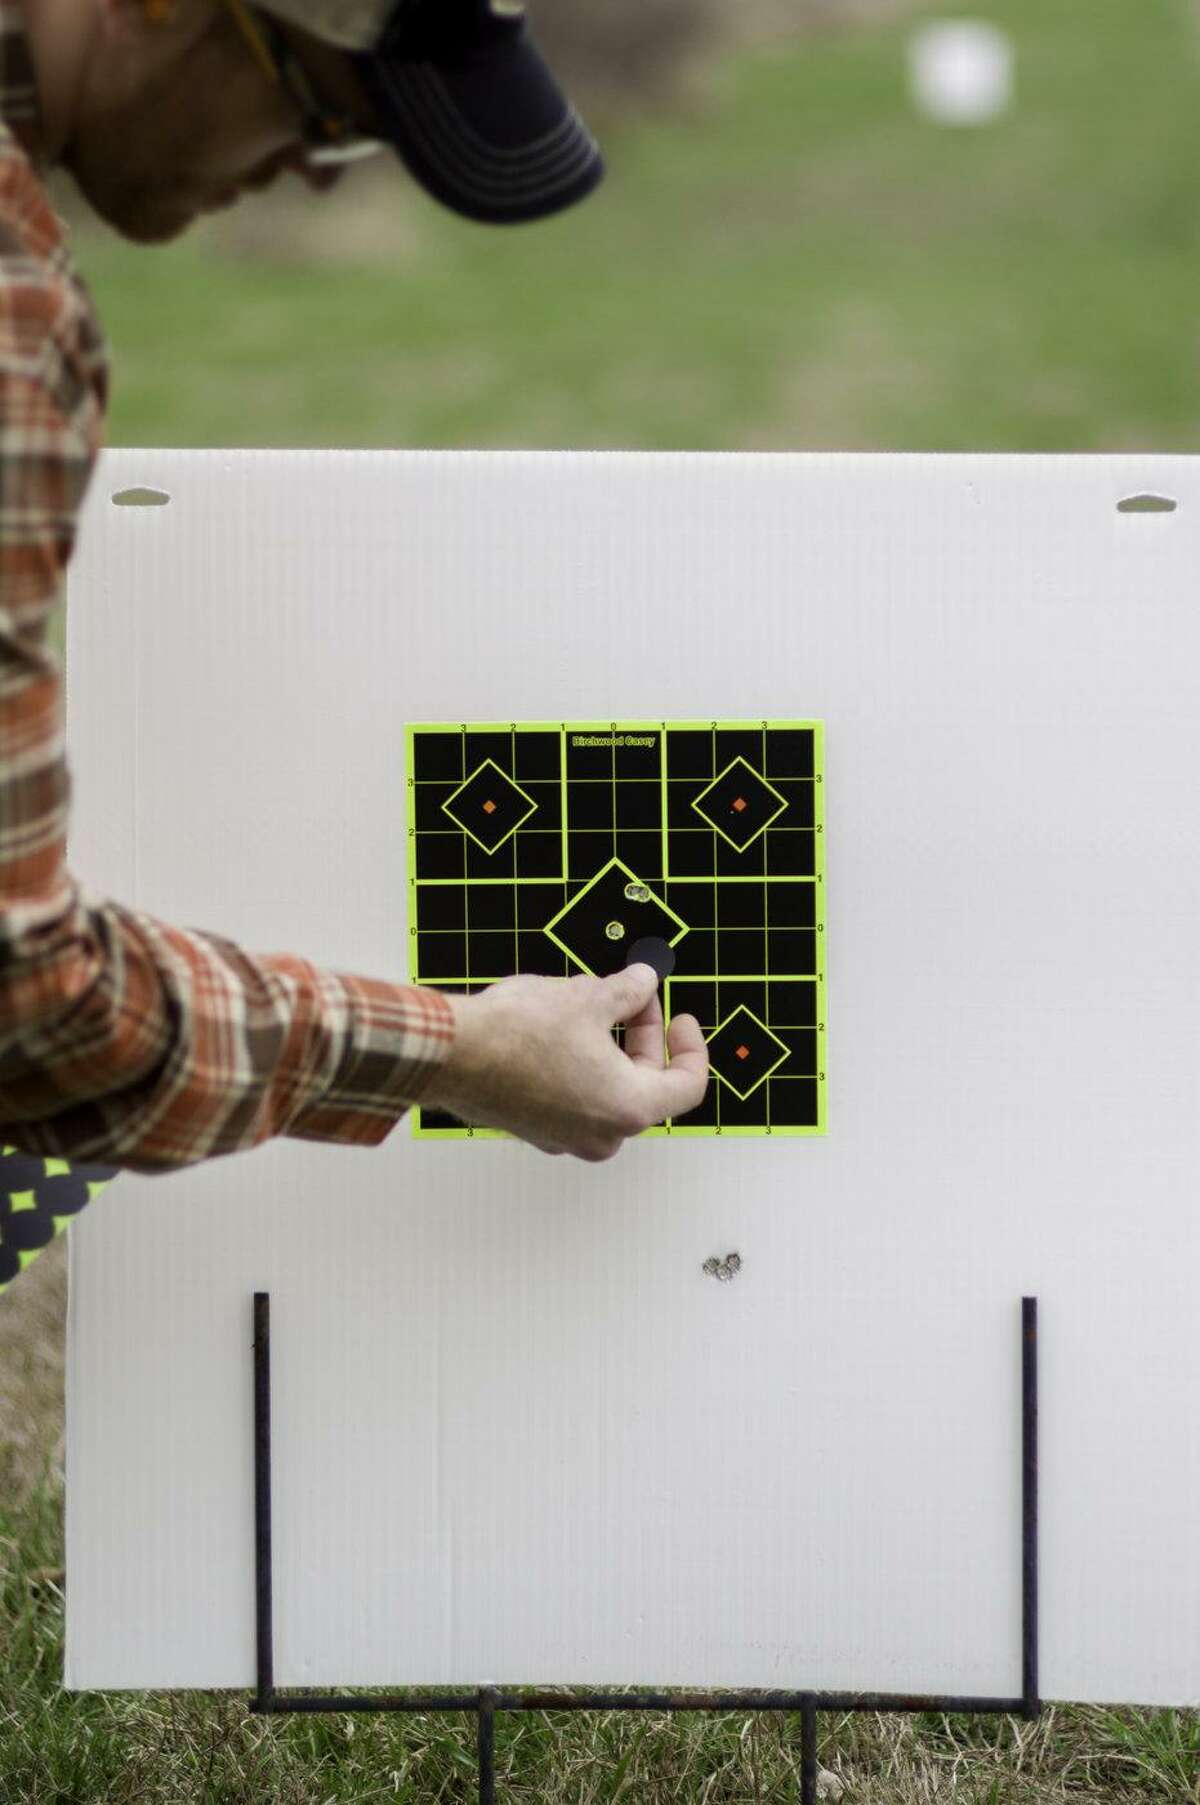 The Birchwood Casey Shoot-N-C targets can sure make seeing where you are hitting a lot easier when it comes time to sight in your rifle.